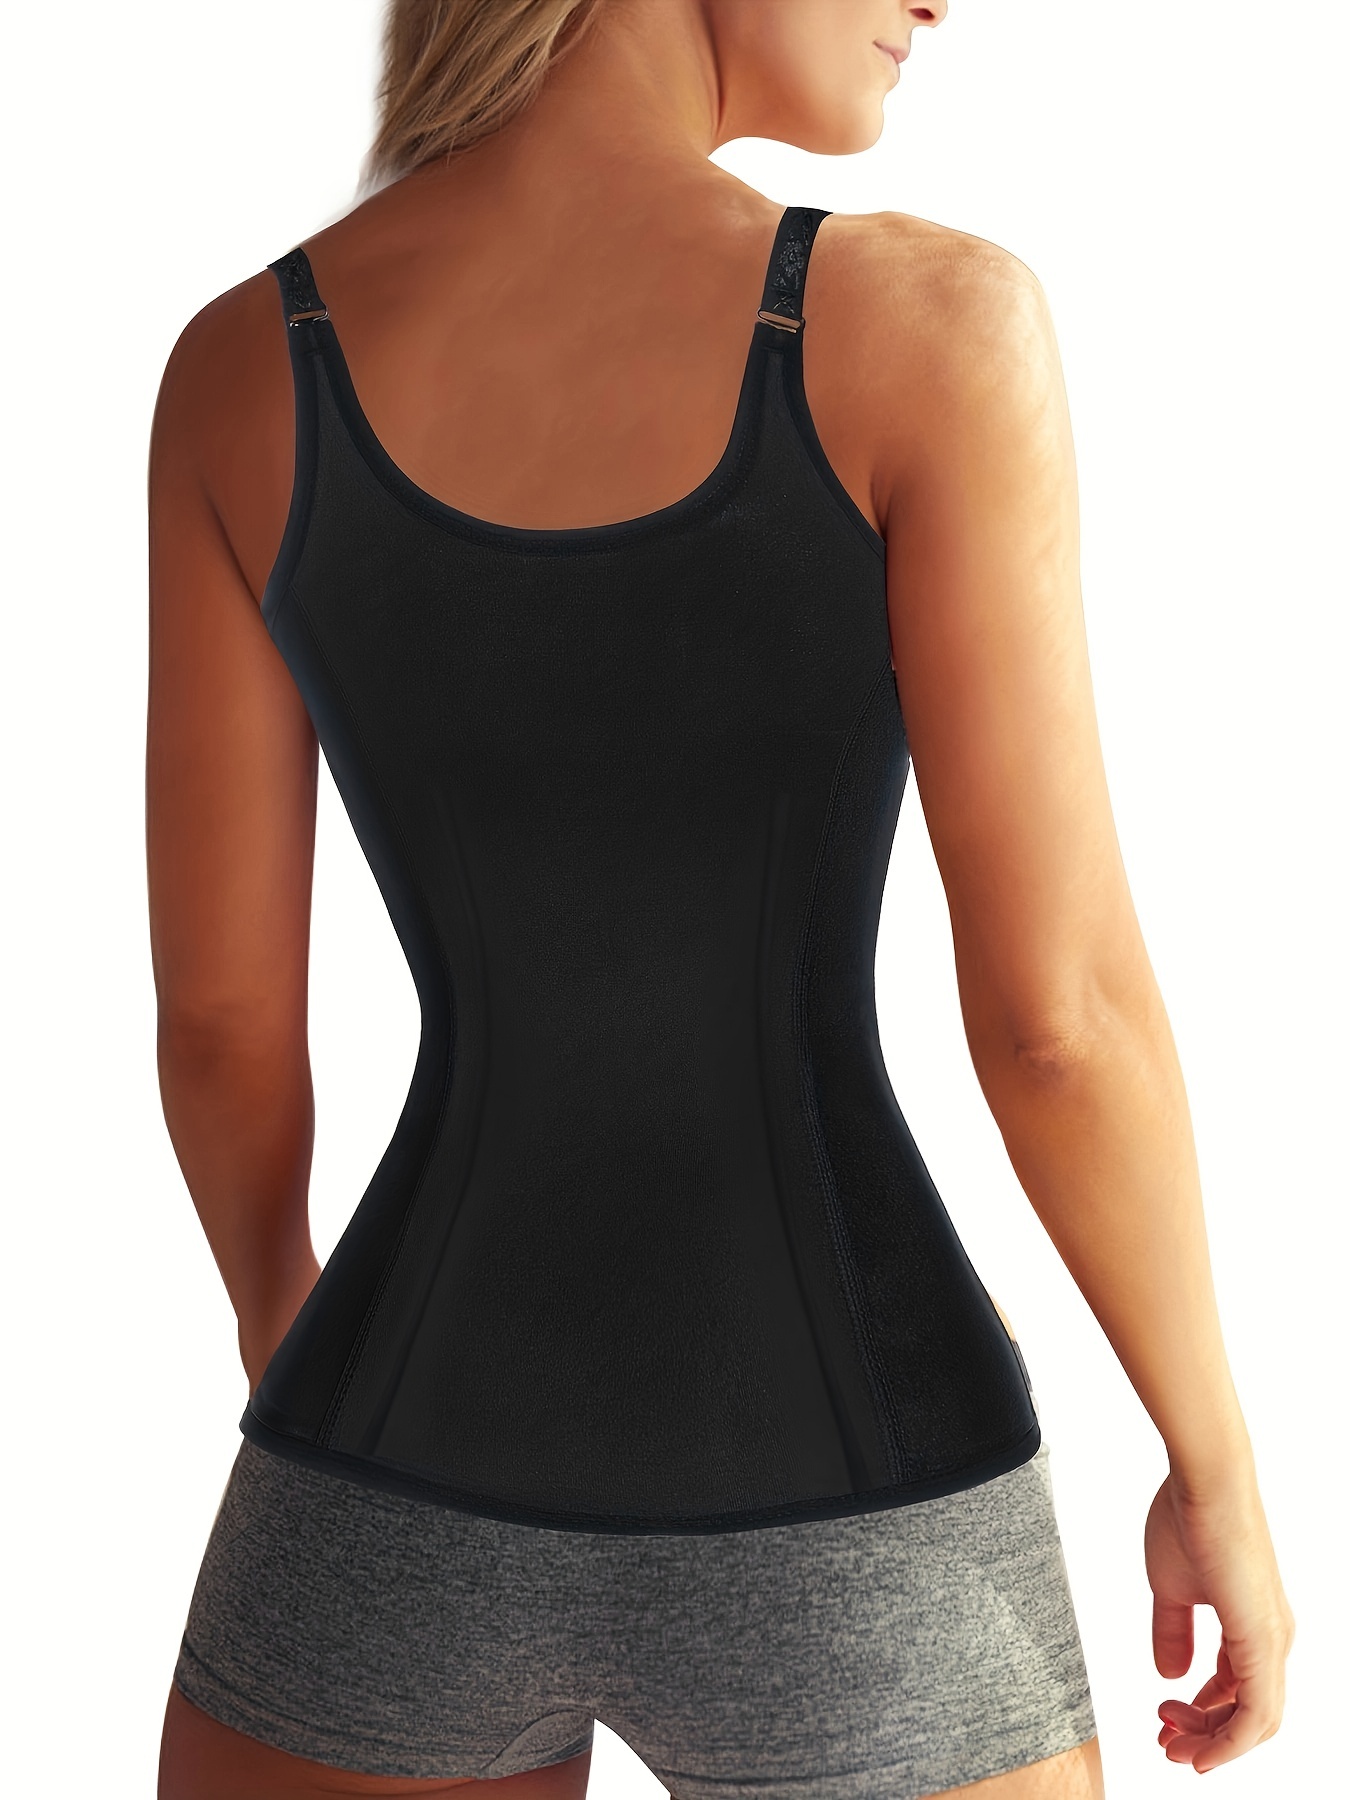 Scarboro Corset Shaping Vest Top Waist Trainer Tummy Control